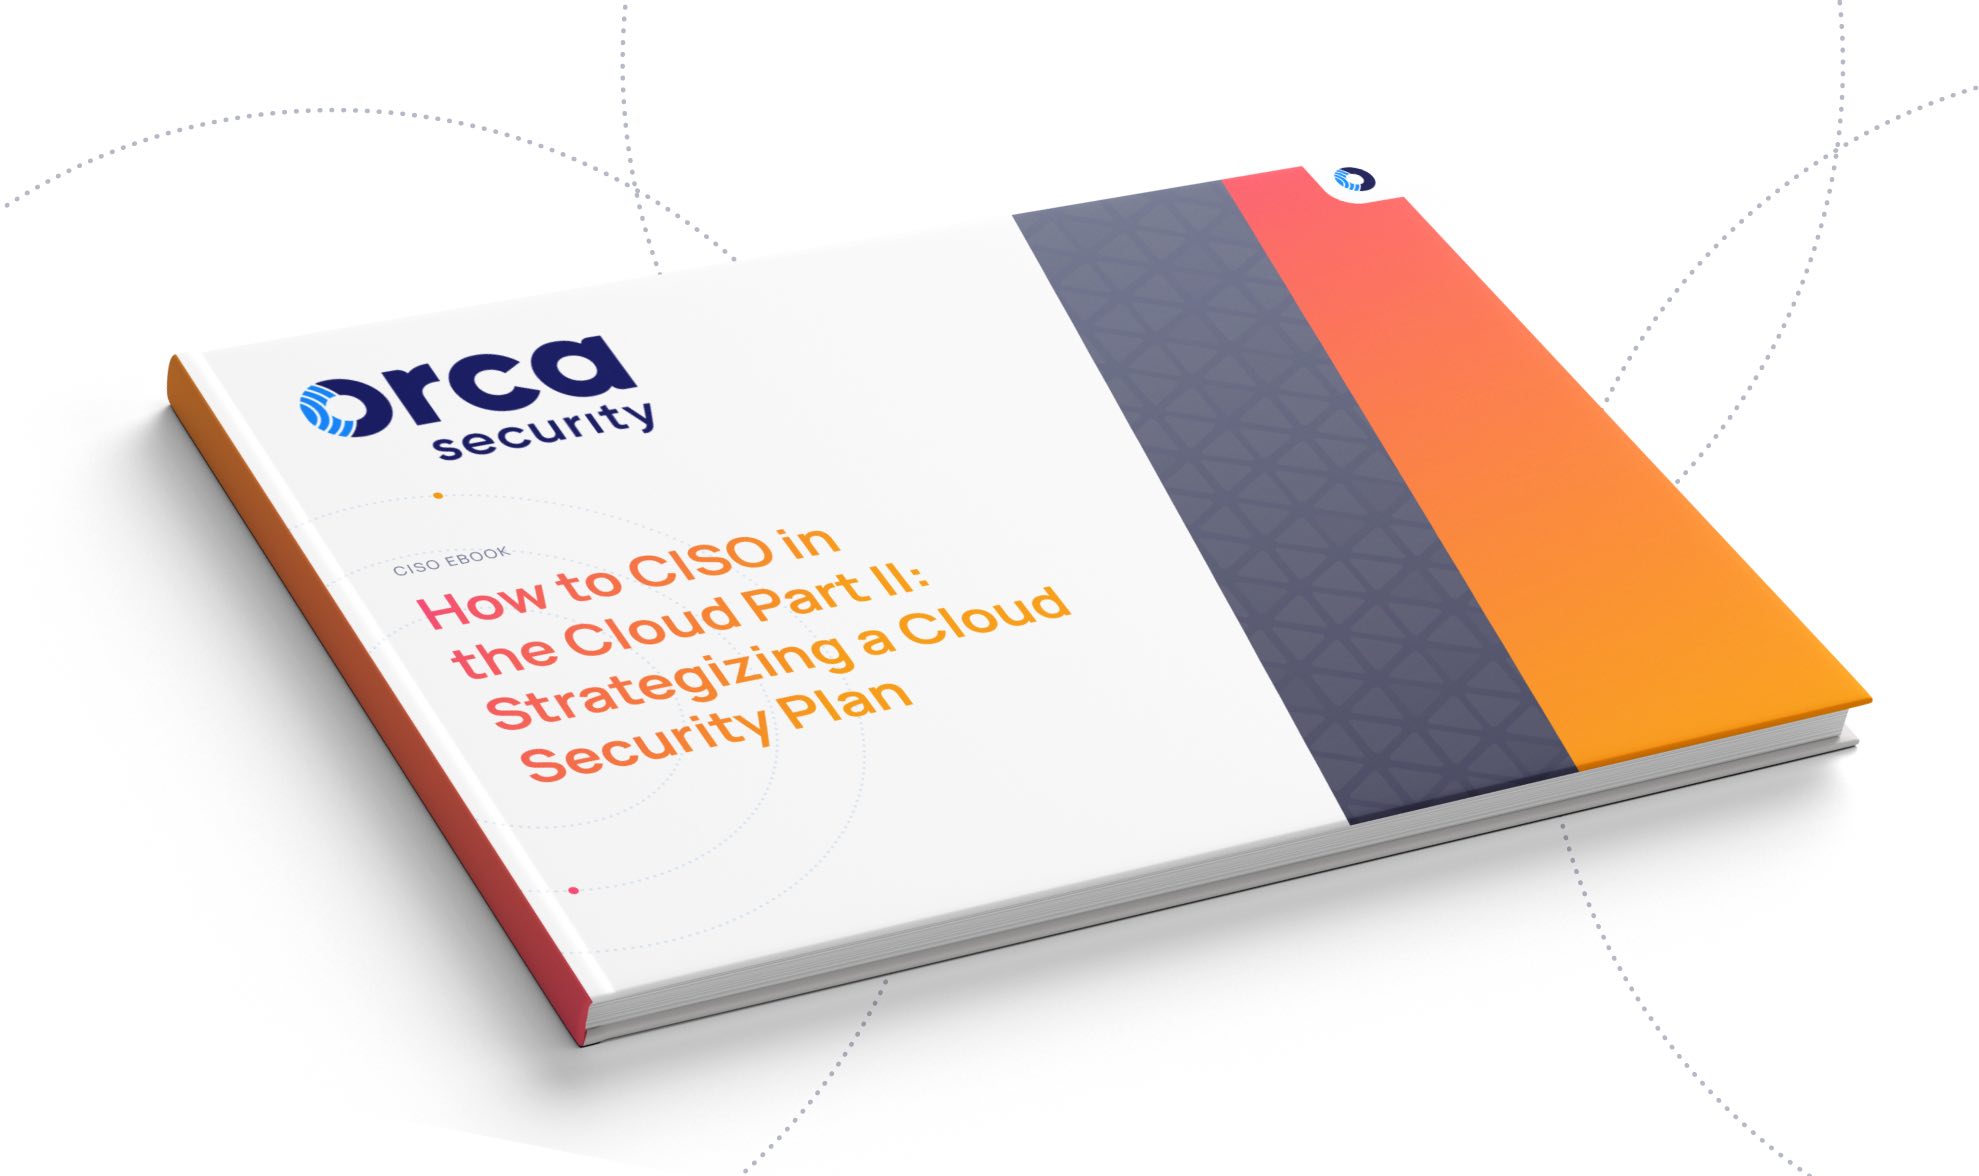 How to CISO in the Cloud Part 2